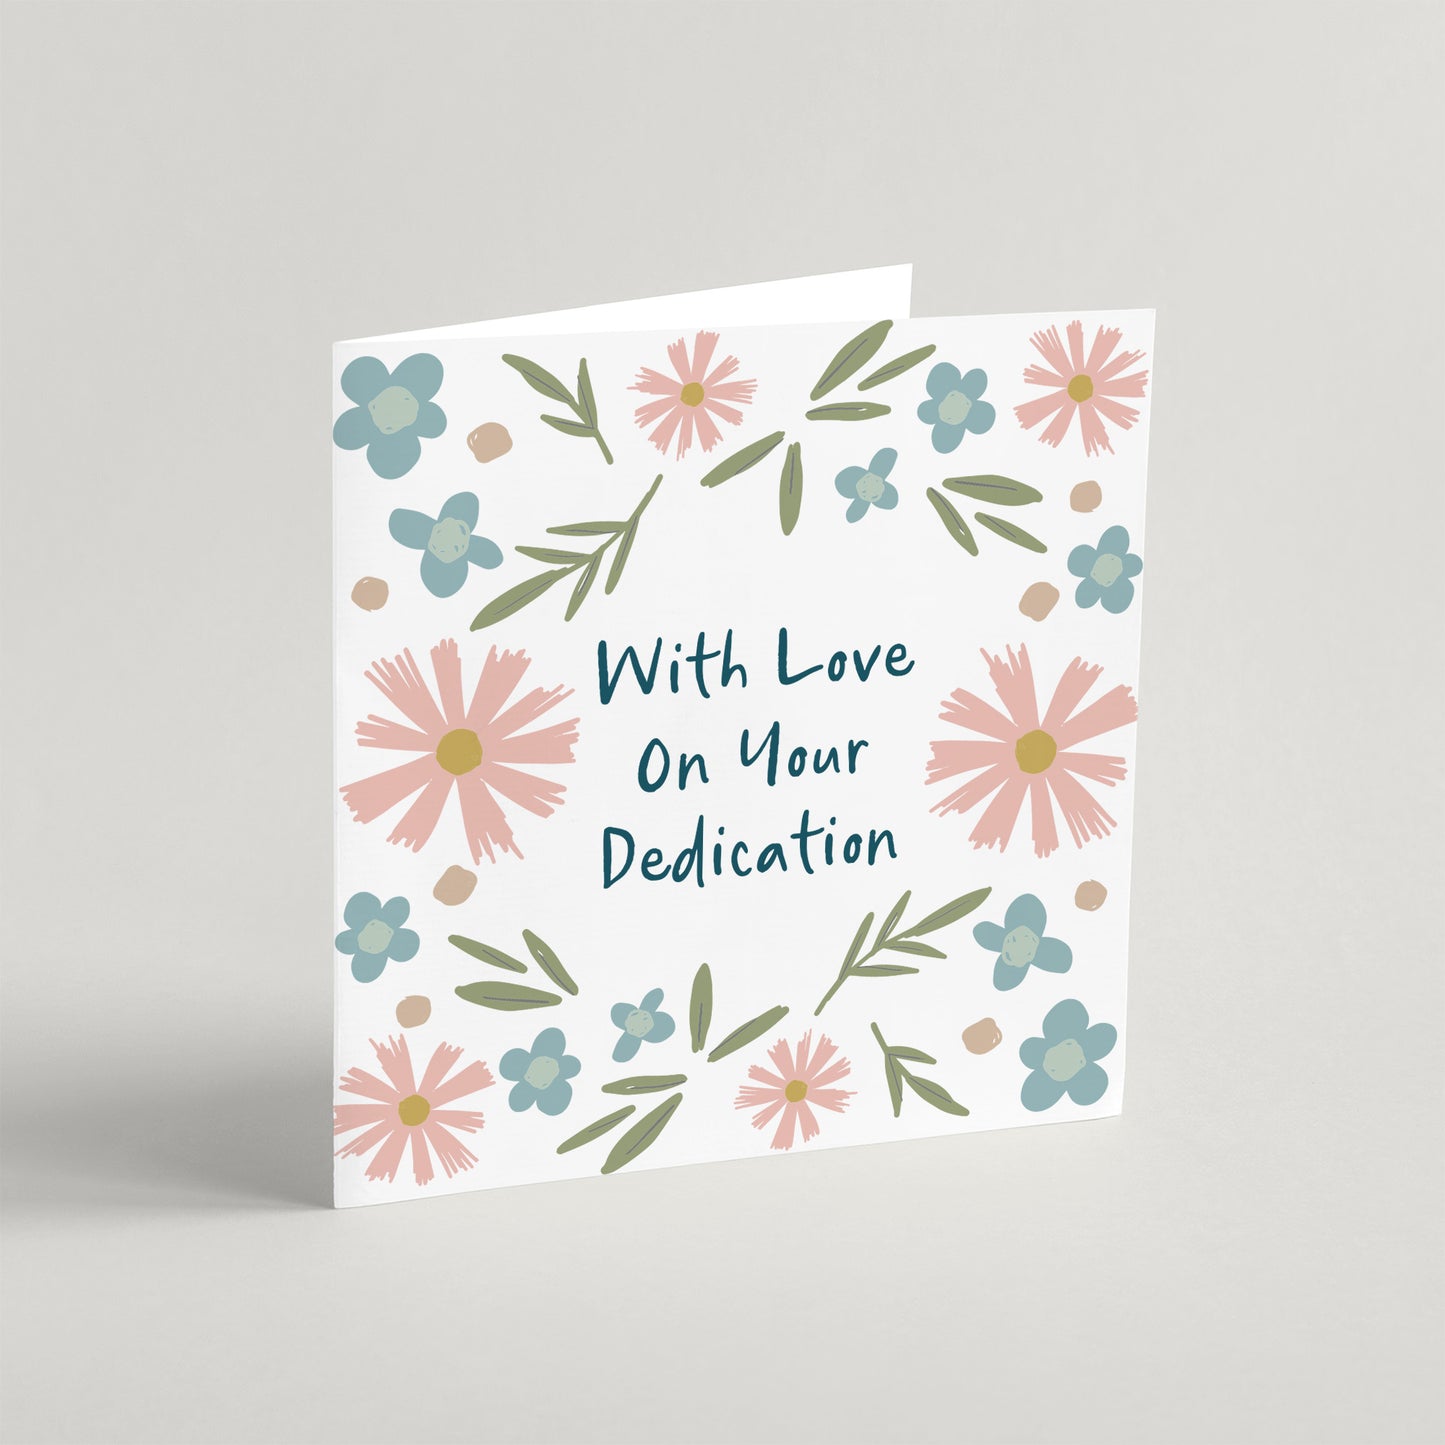 'With Love On Your Dedication' Greeting Card & Envelope